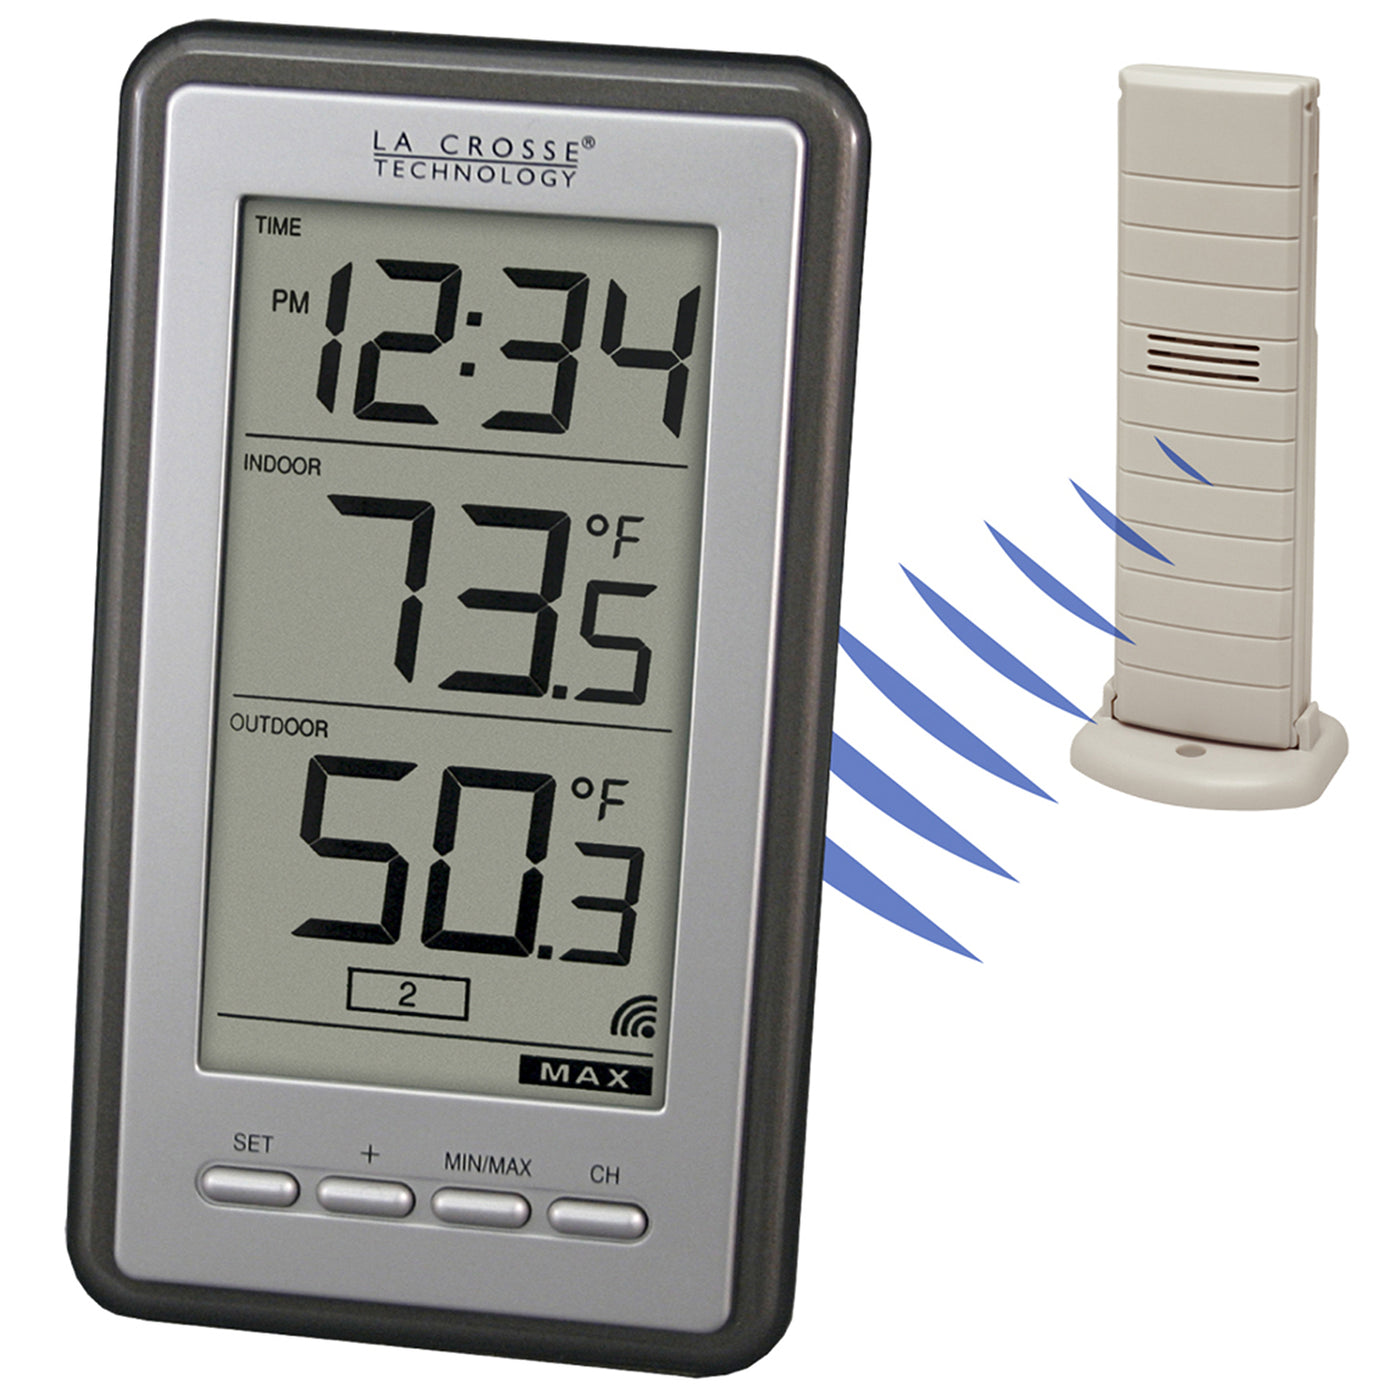 La Crosse Technology Outdoor Thermometers 